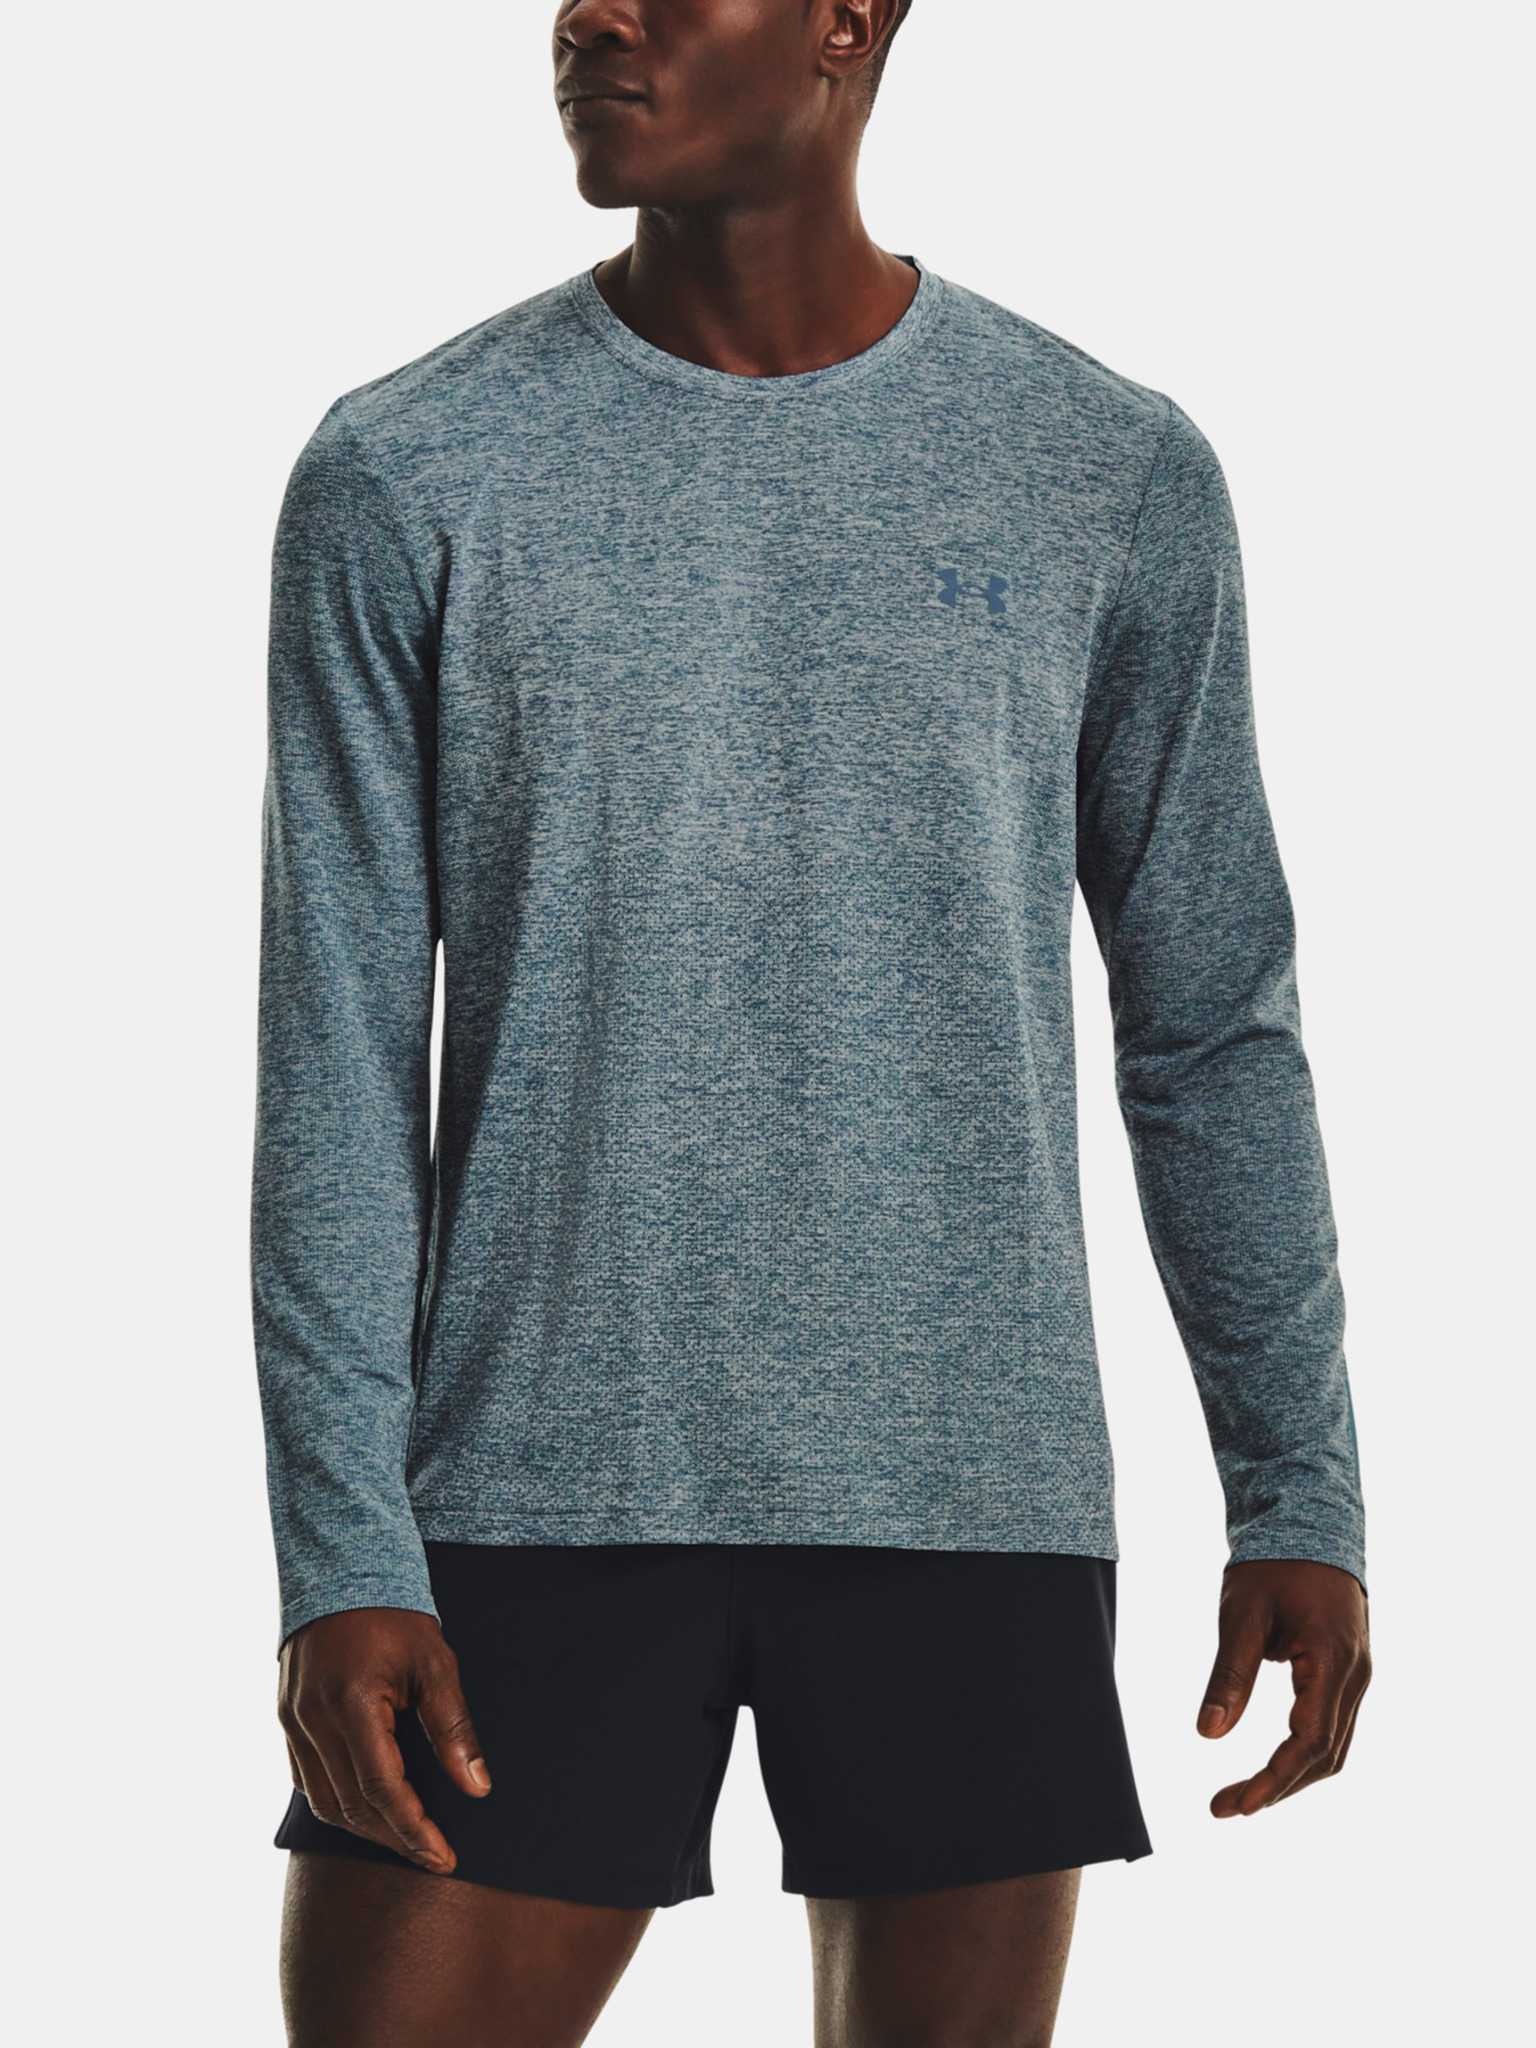 Men's Long Sleeve Seamless Sweater - All in Motion Black M